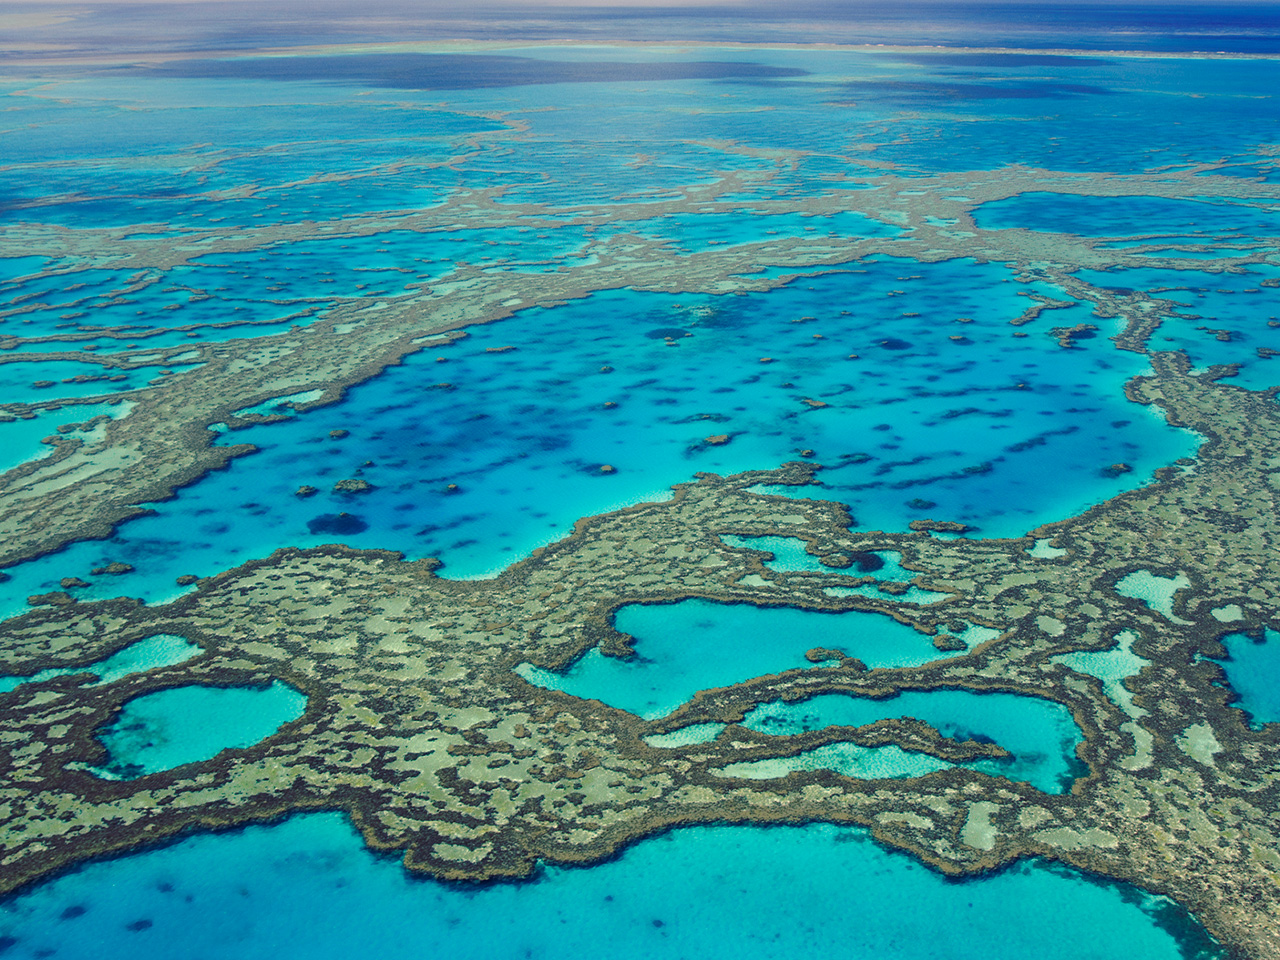 Marvelous Facts About the Great Barrier Reef